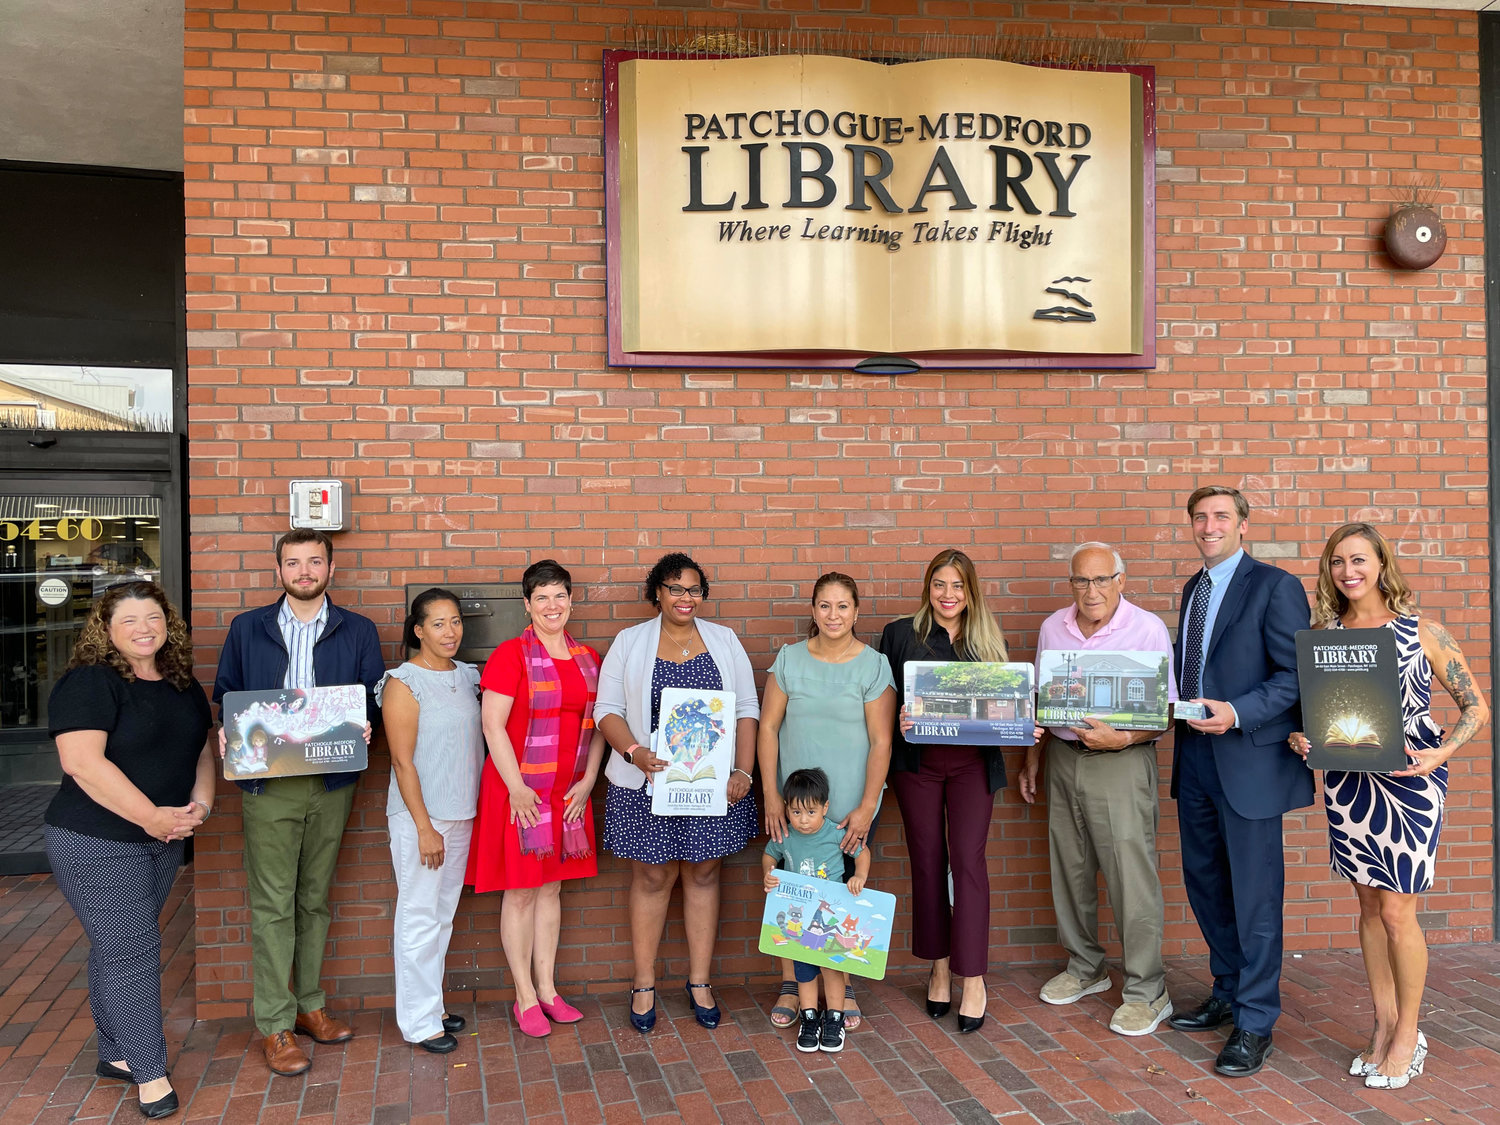 A PatchogueMedford Library card unlocks a world of Hispanic culture